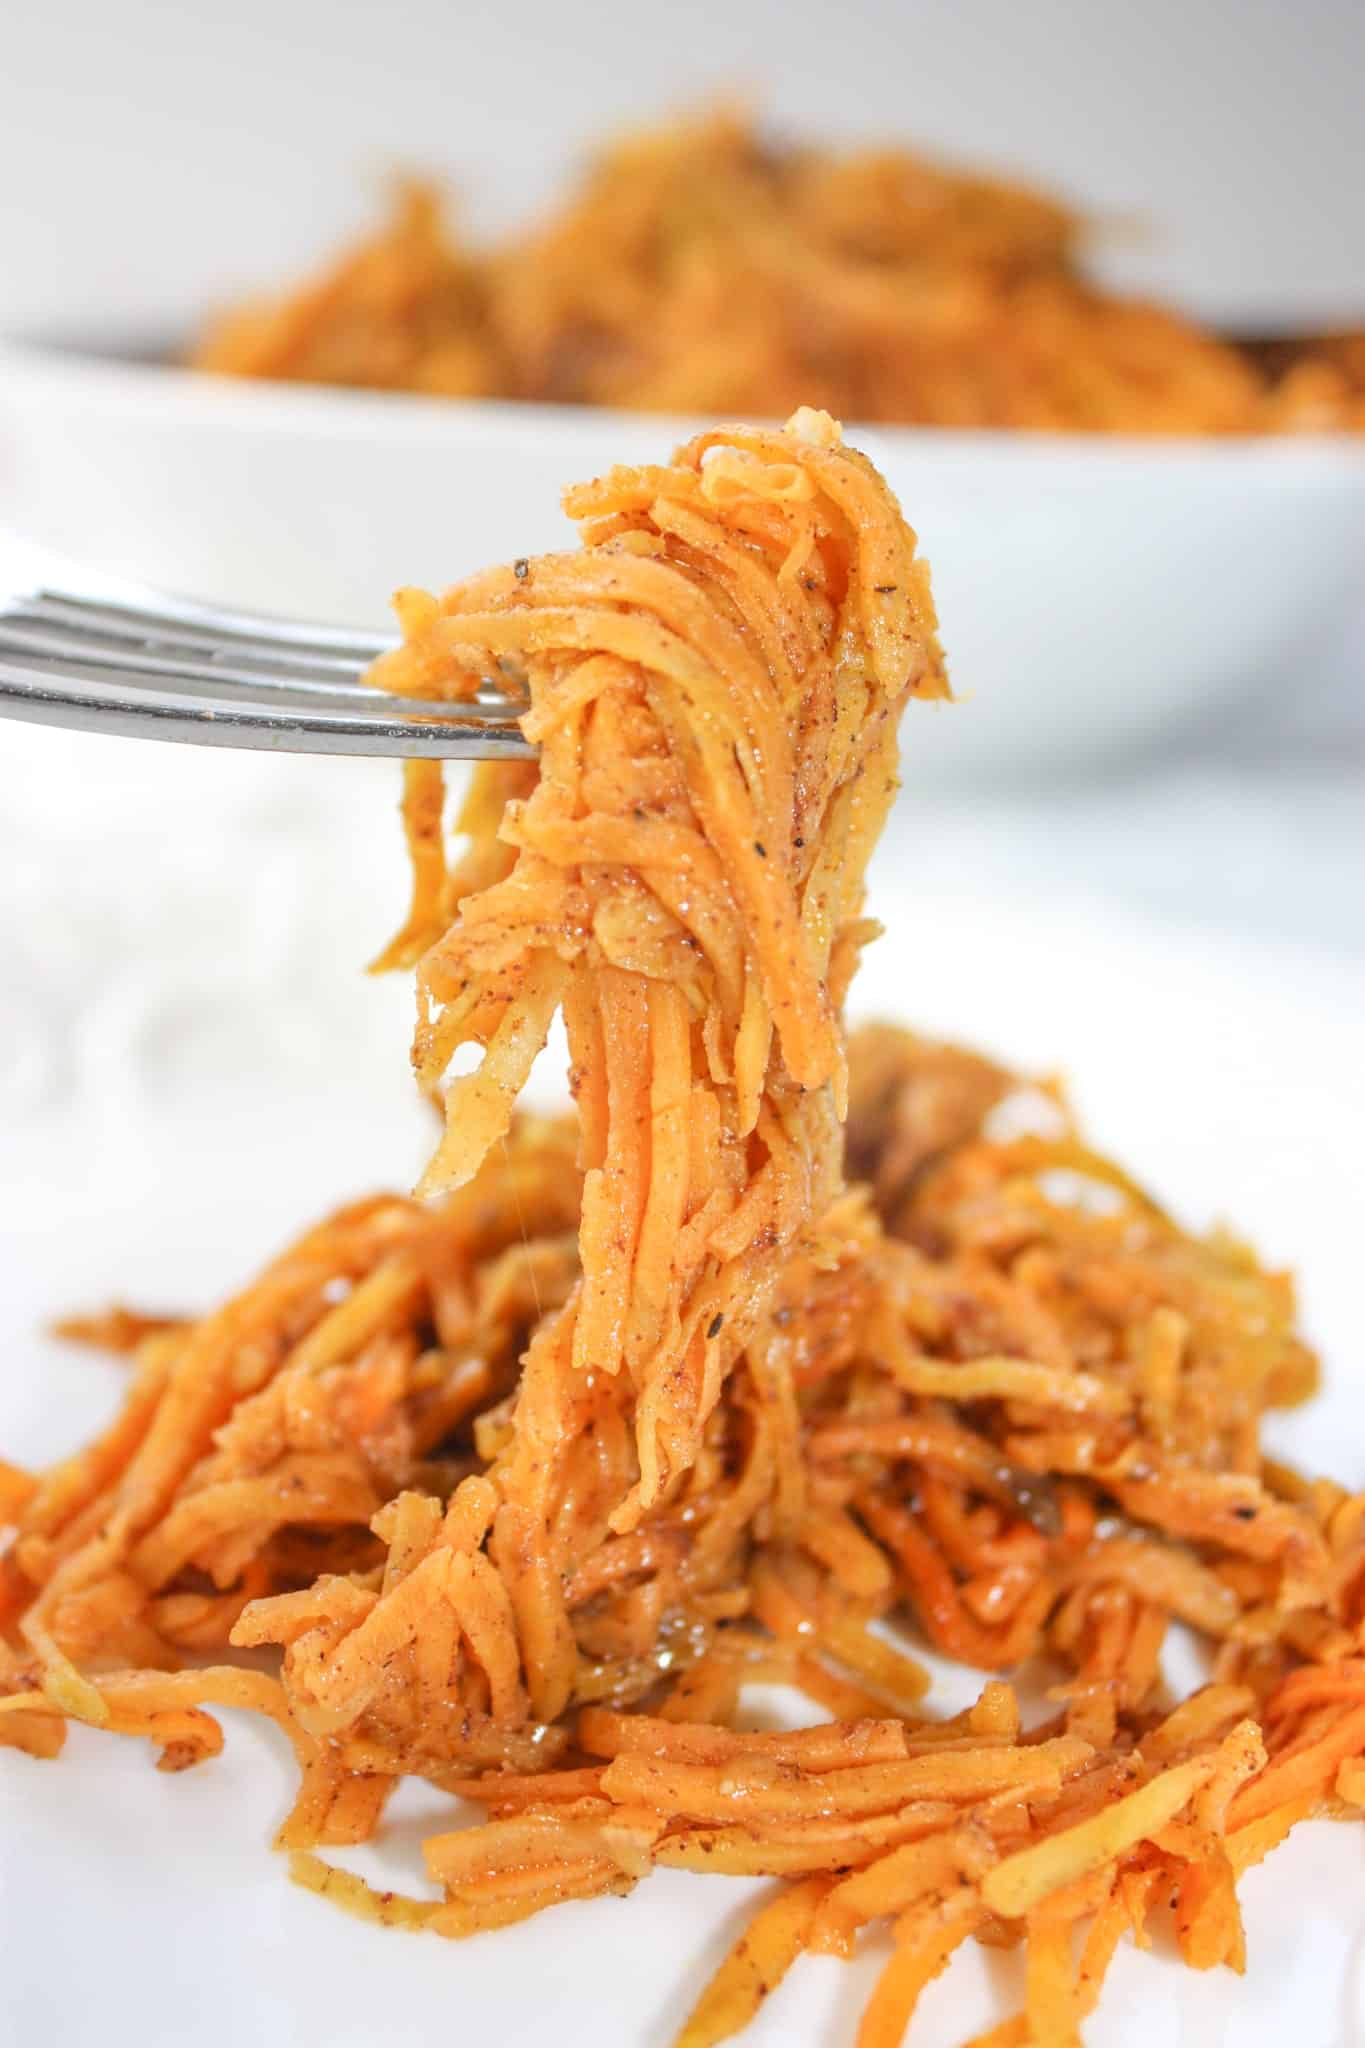 Hot Sweet Potato Slaw is a flavourful side dish that will complement any meal.  Add it to your Thanksgiving menu or it is easy enough to prepare any night of the week.